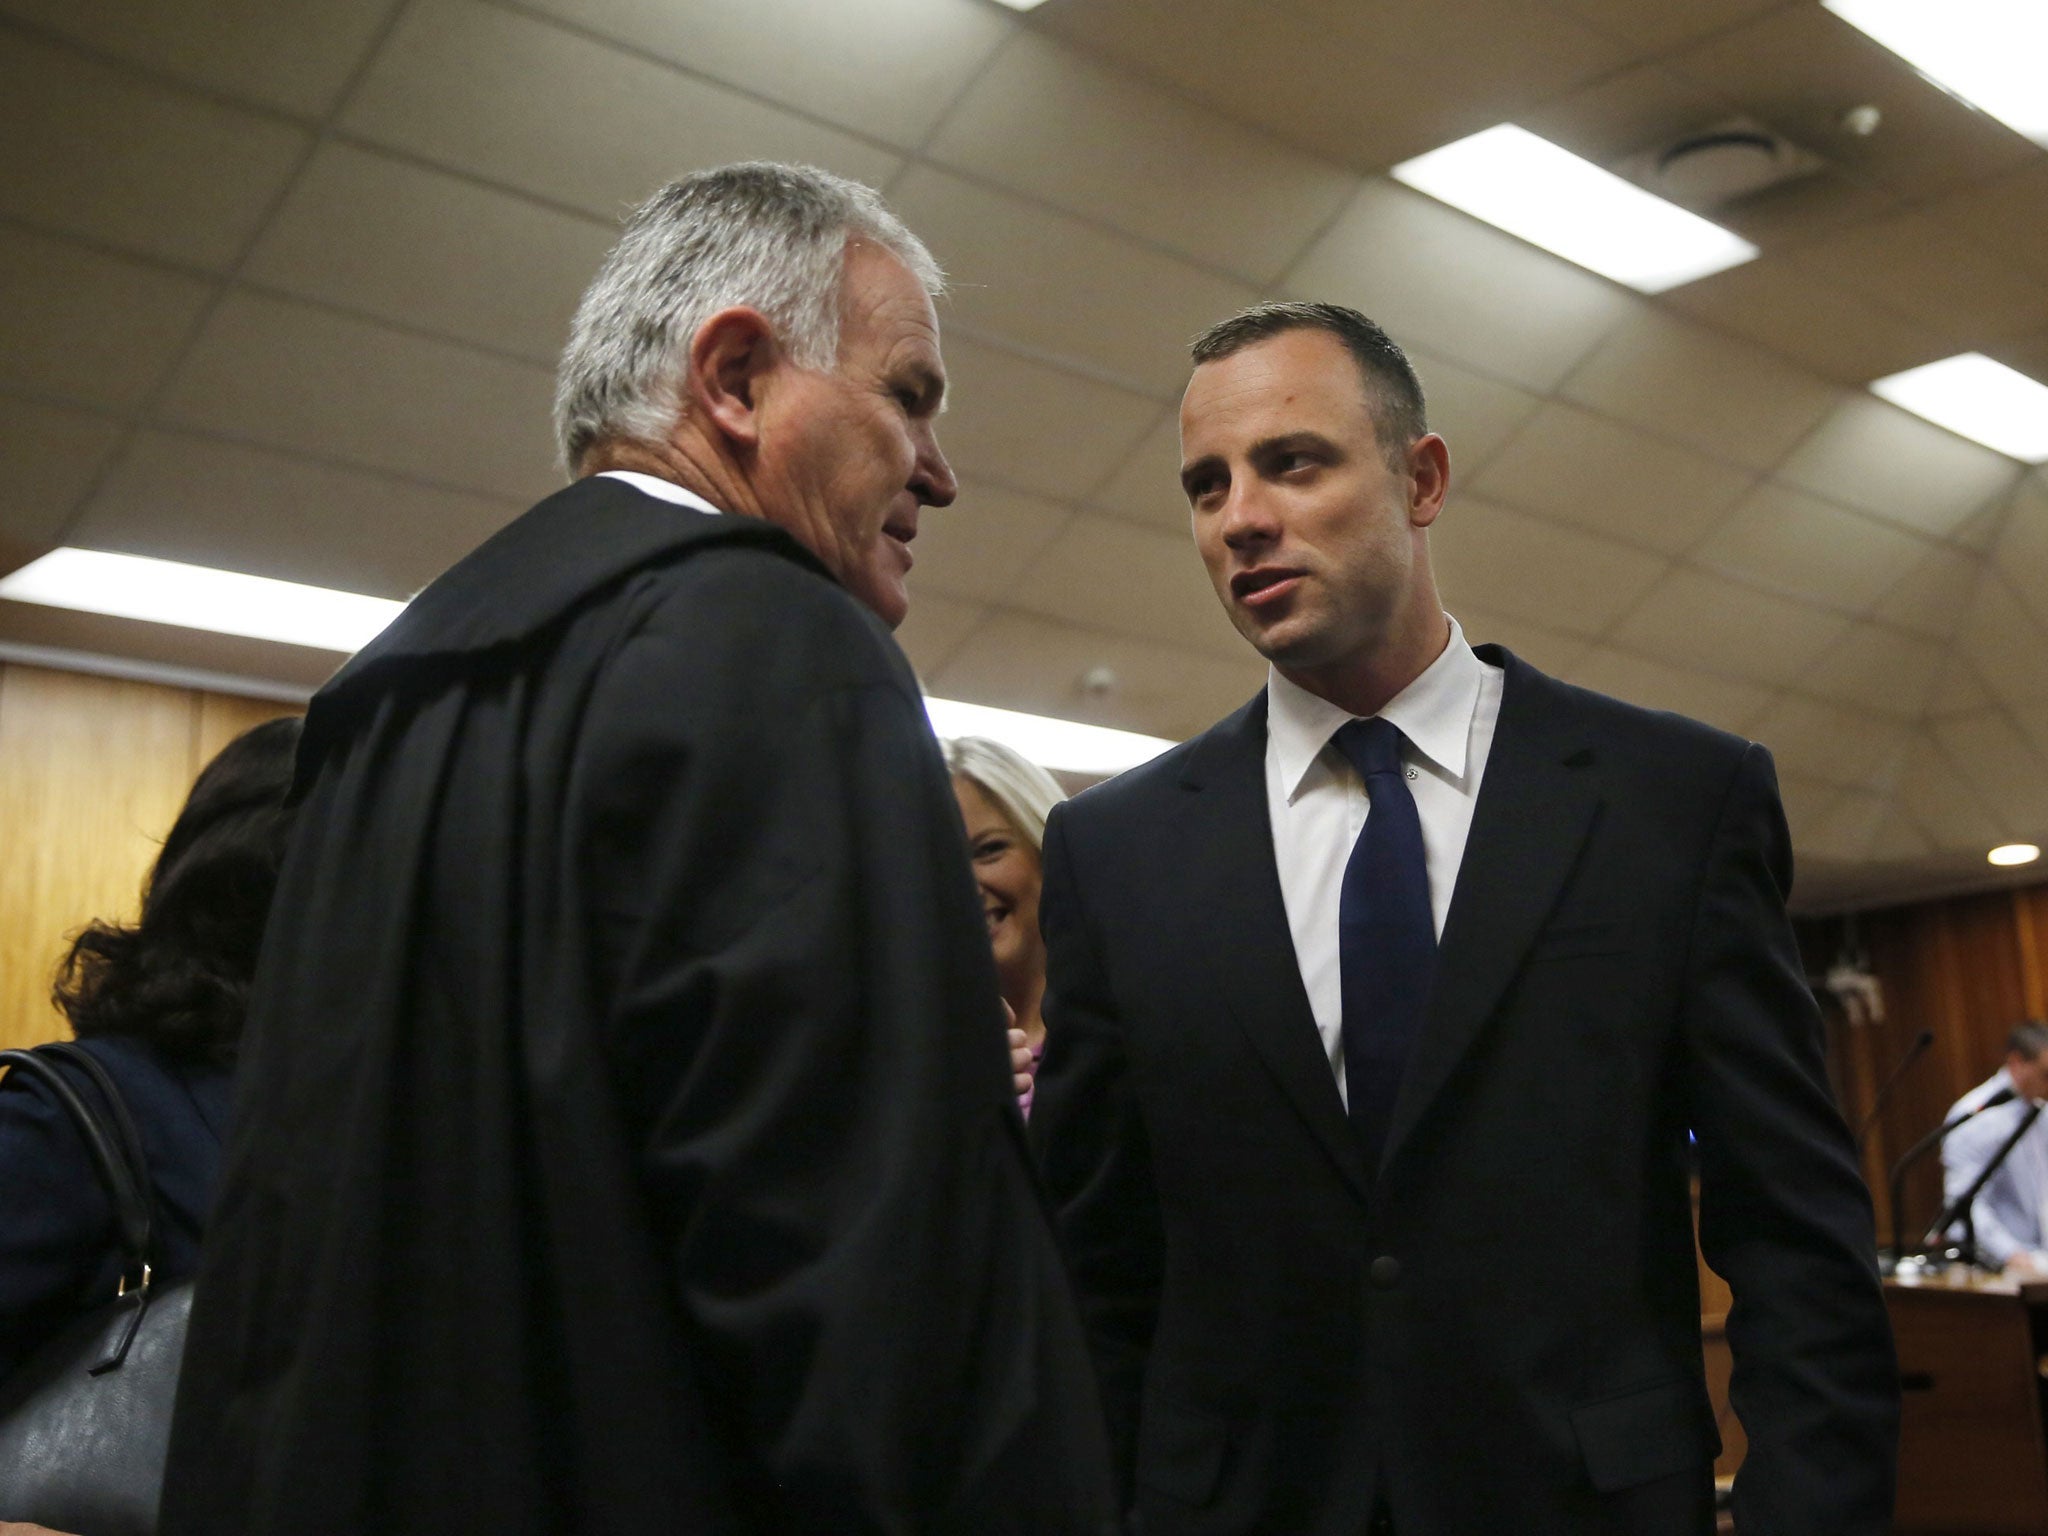 Oscar Pistorius speaks with his defence lawyer Barry Roux at the North Gauteng High Court in Pretoria prior to a hearing of his murder trial